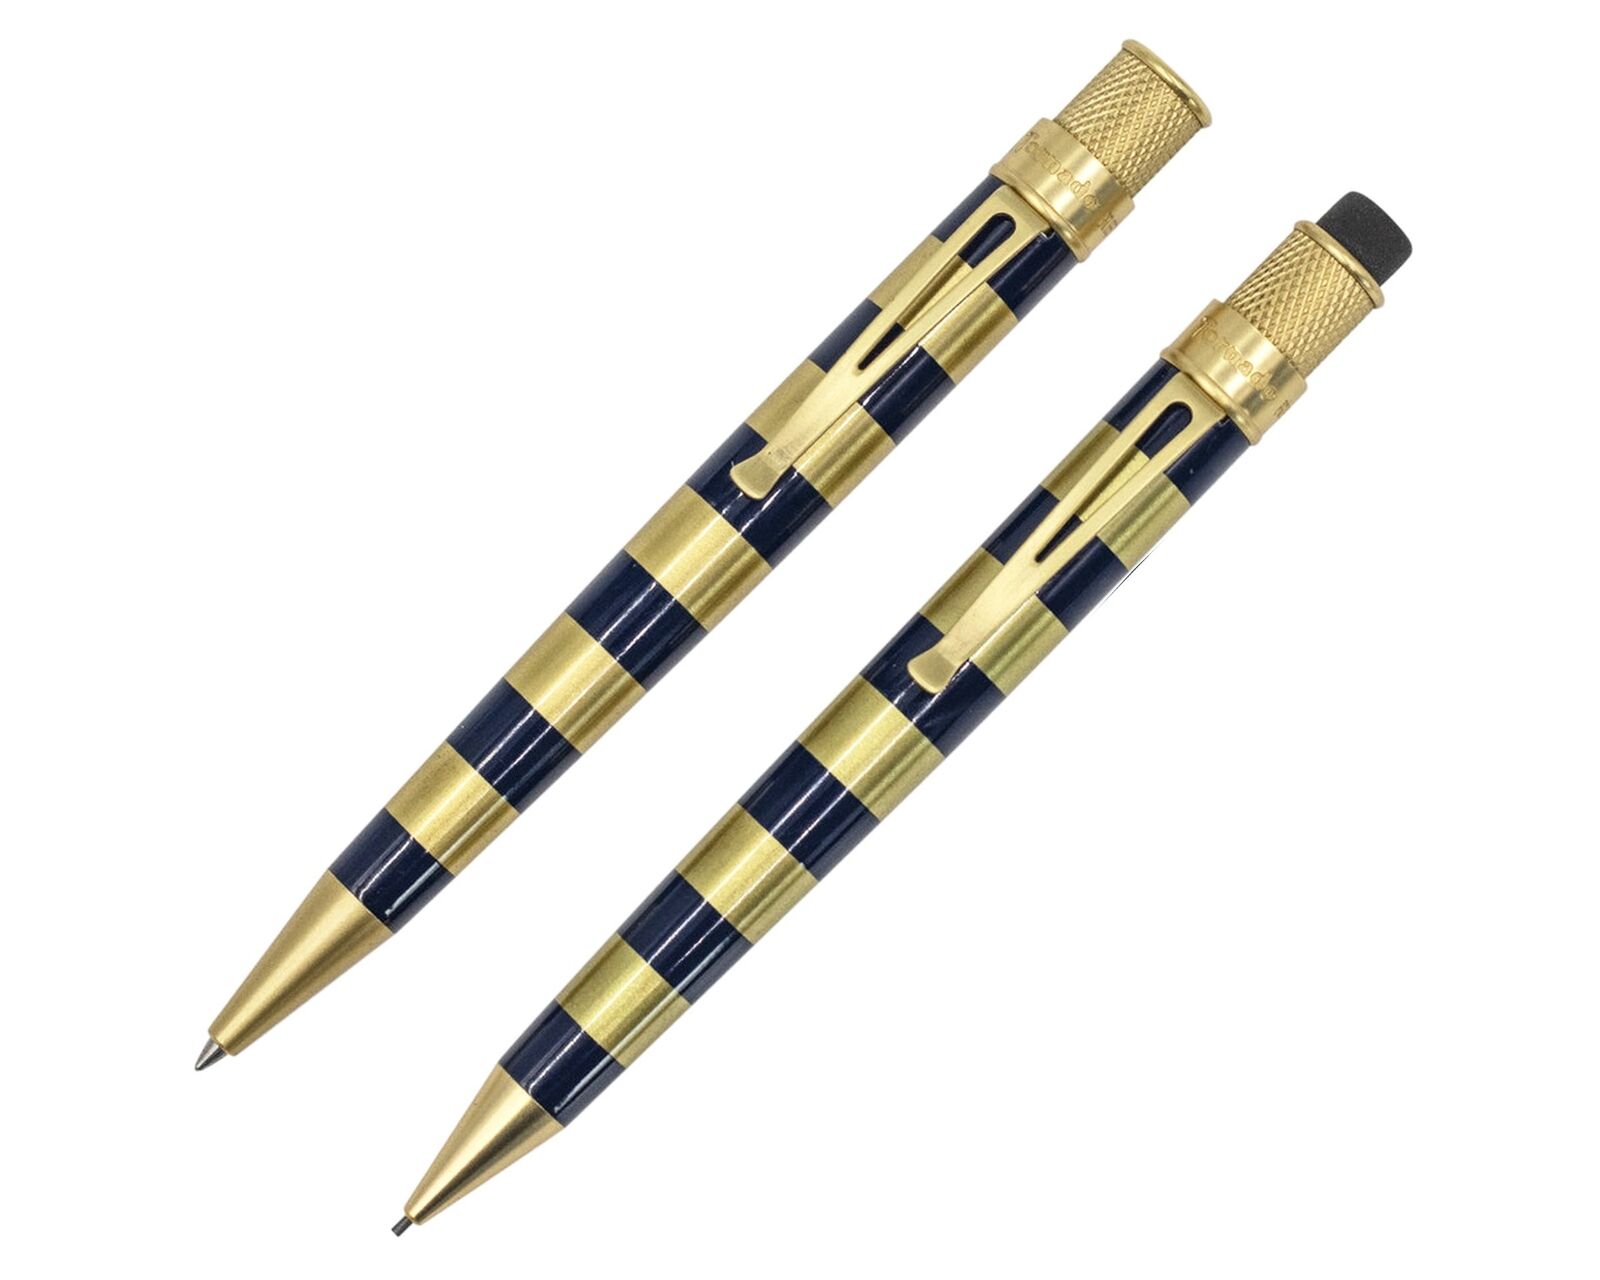 Retro 51 Pen - Pencil Set - Gilded Rings - Sealed and #\'d w/  Rickshaw Sleeve